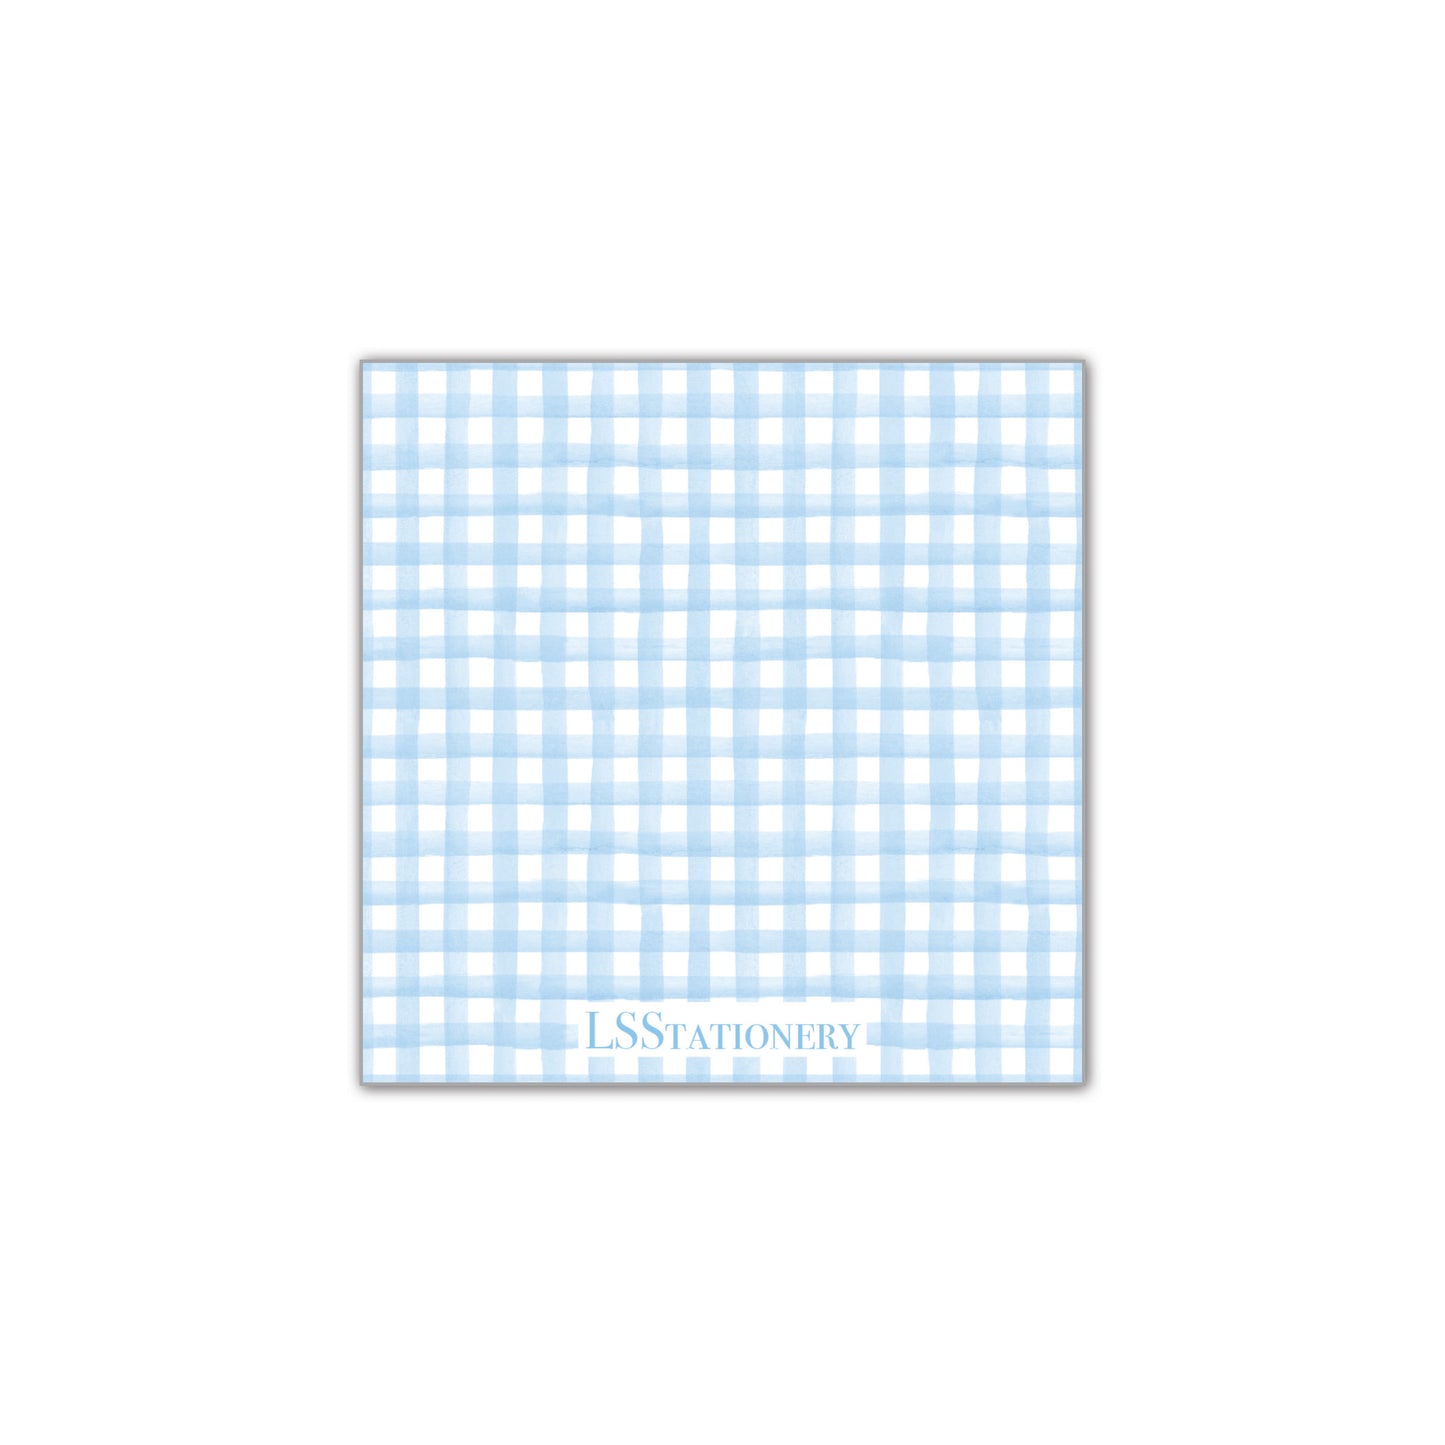 Loads of Fun - blue gingham Gift Tag